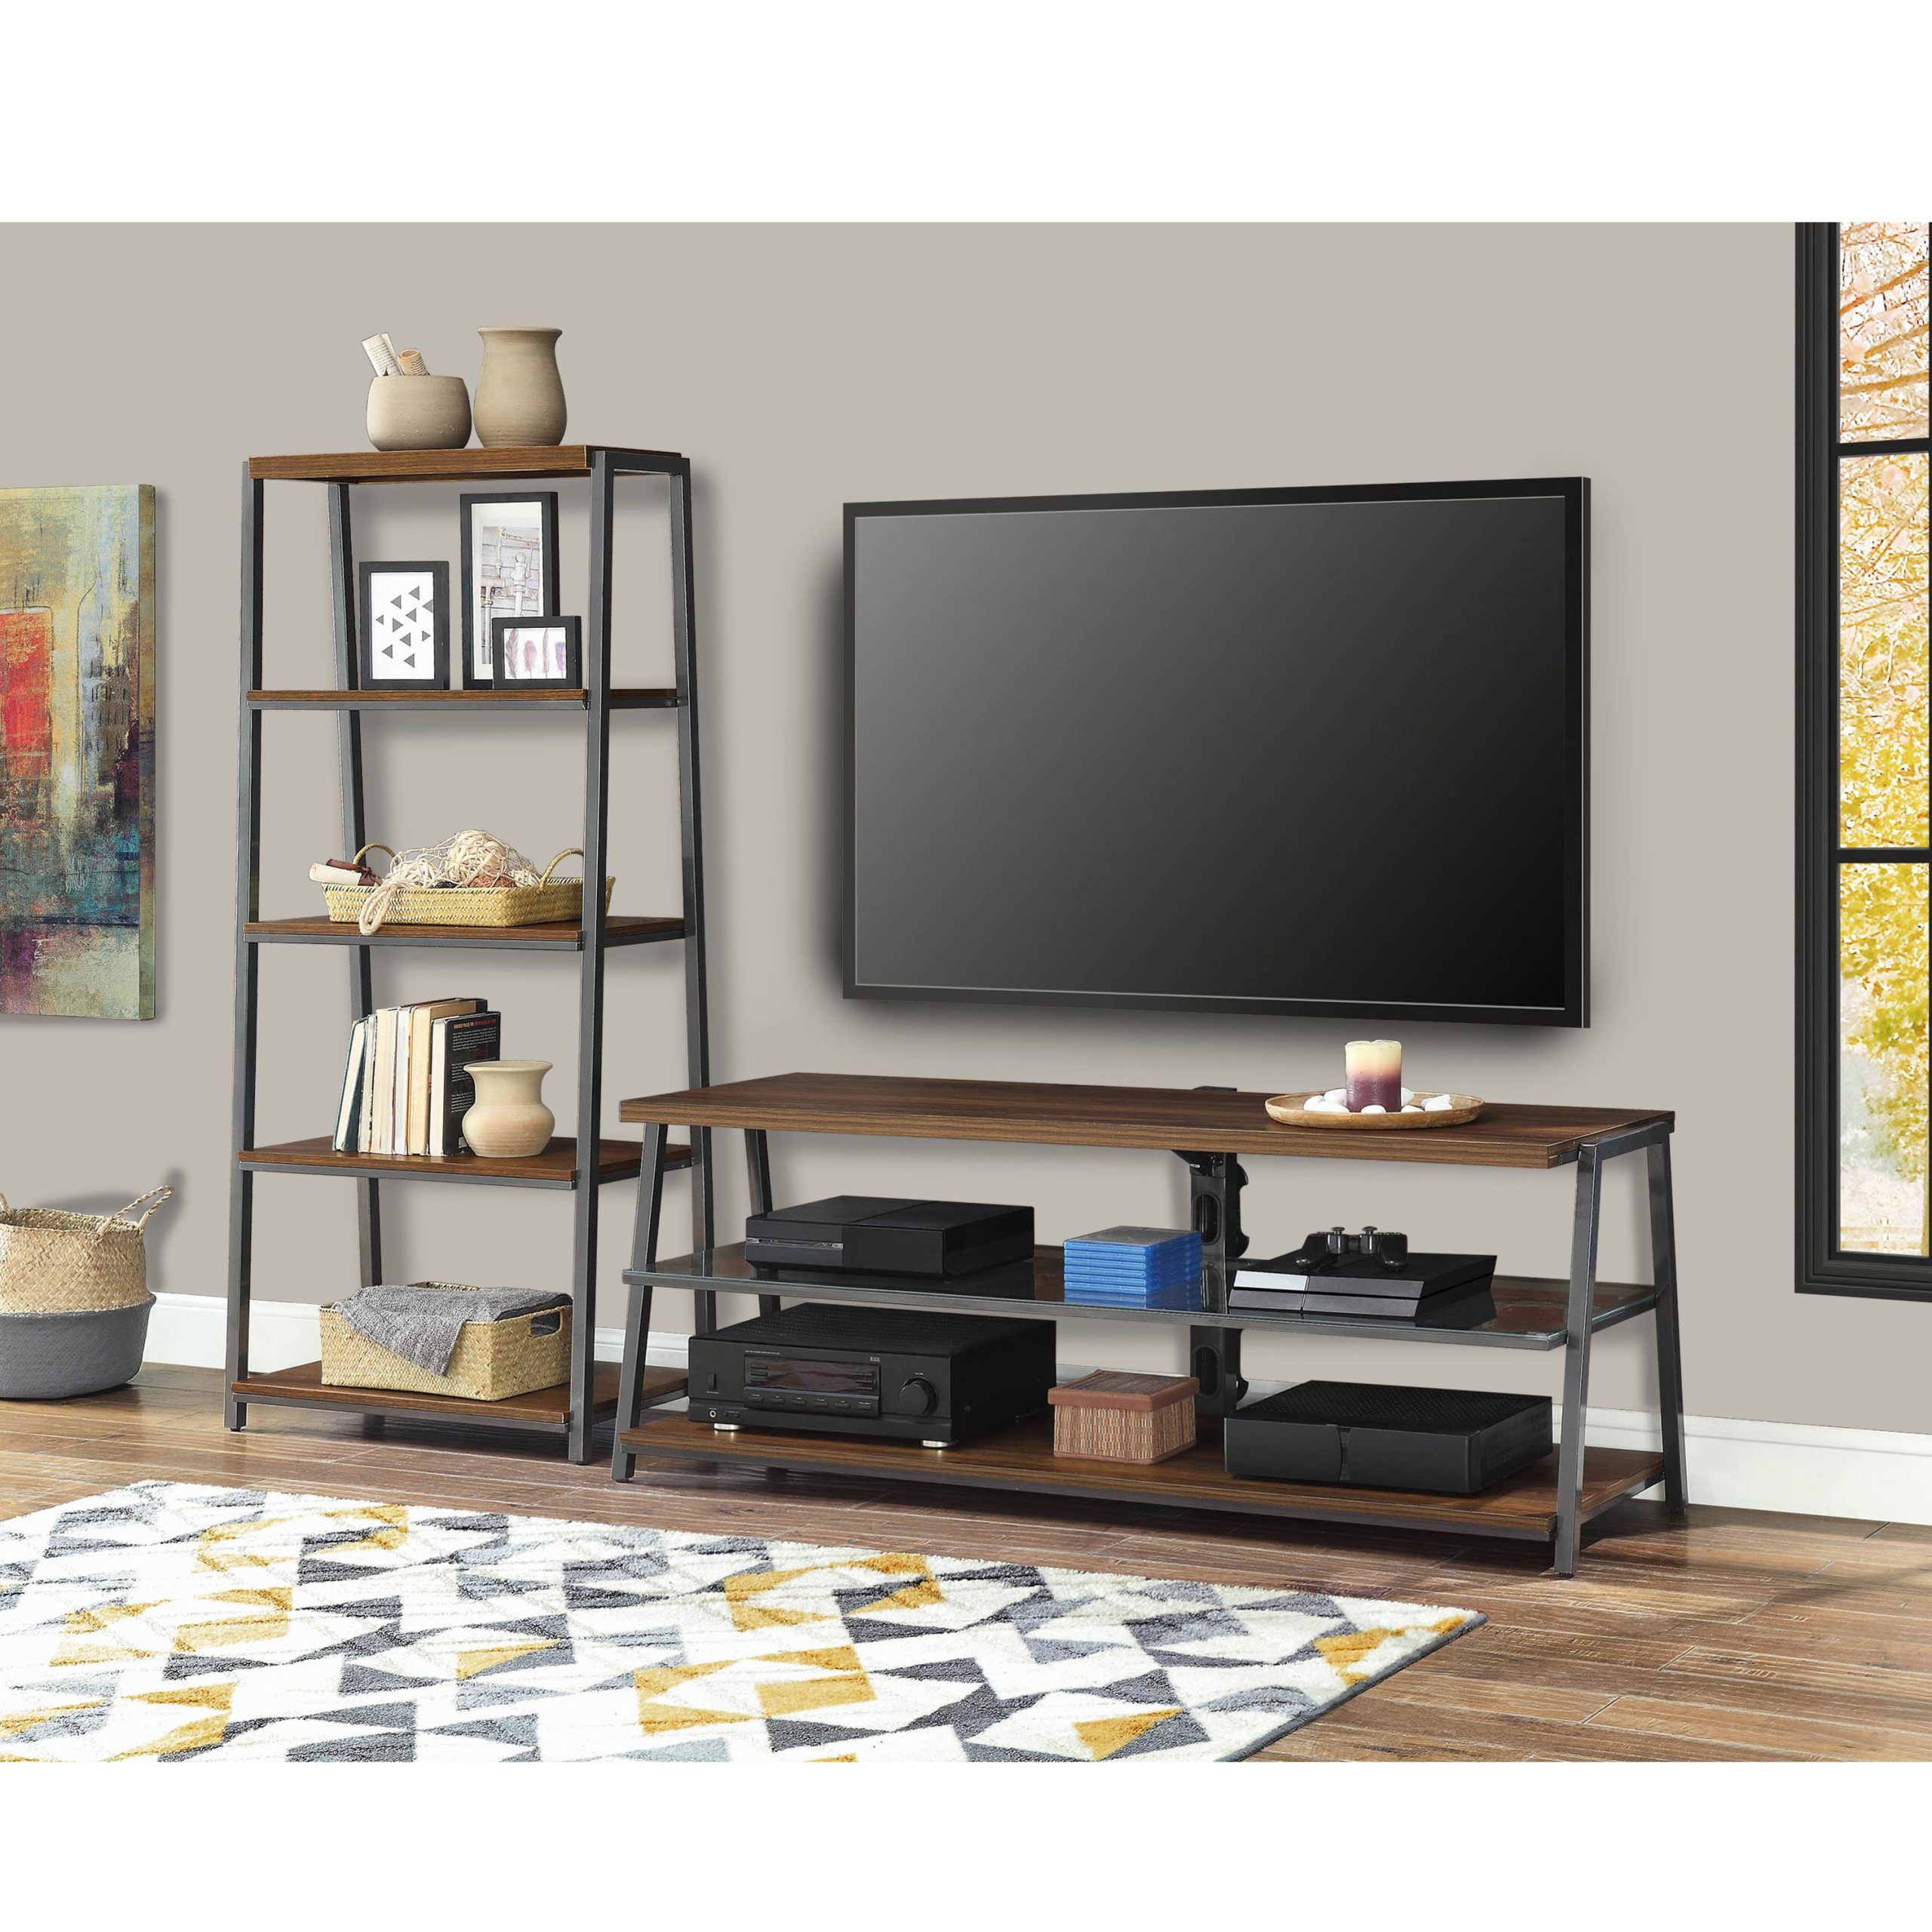 Favorite Top Shelf Mount Tv Stands Throughout Mainstays Arris Tv Stand For 70" Flat Panel Tvs And 4 Shelf Tower Book (View 9 of 15)